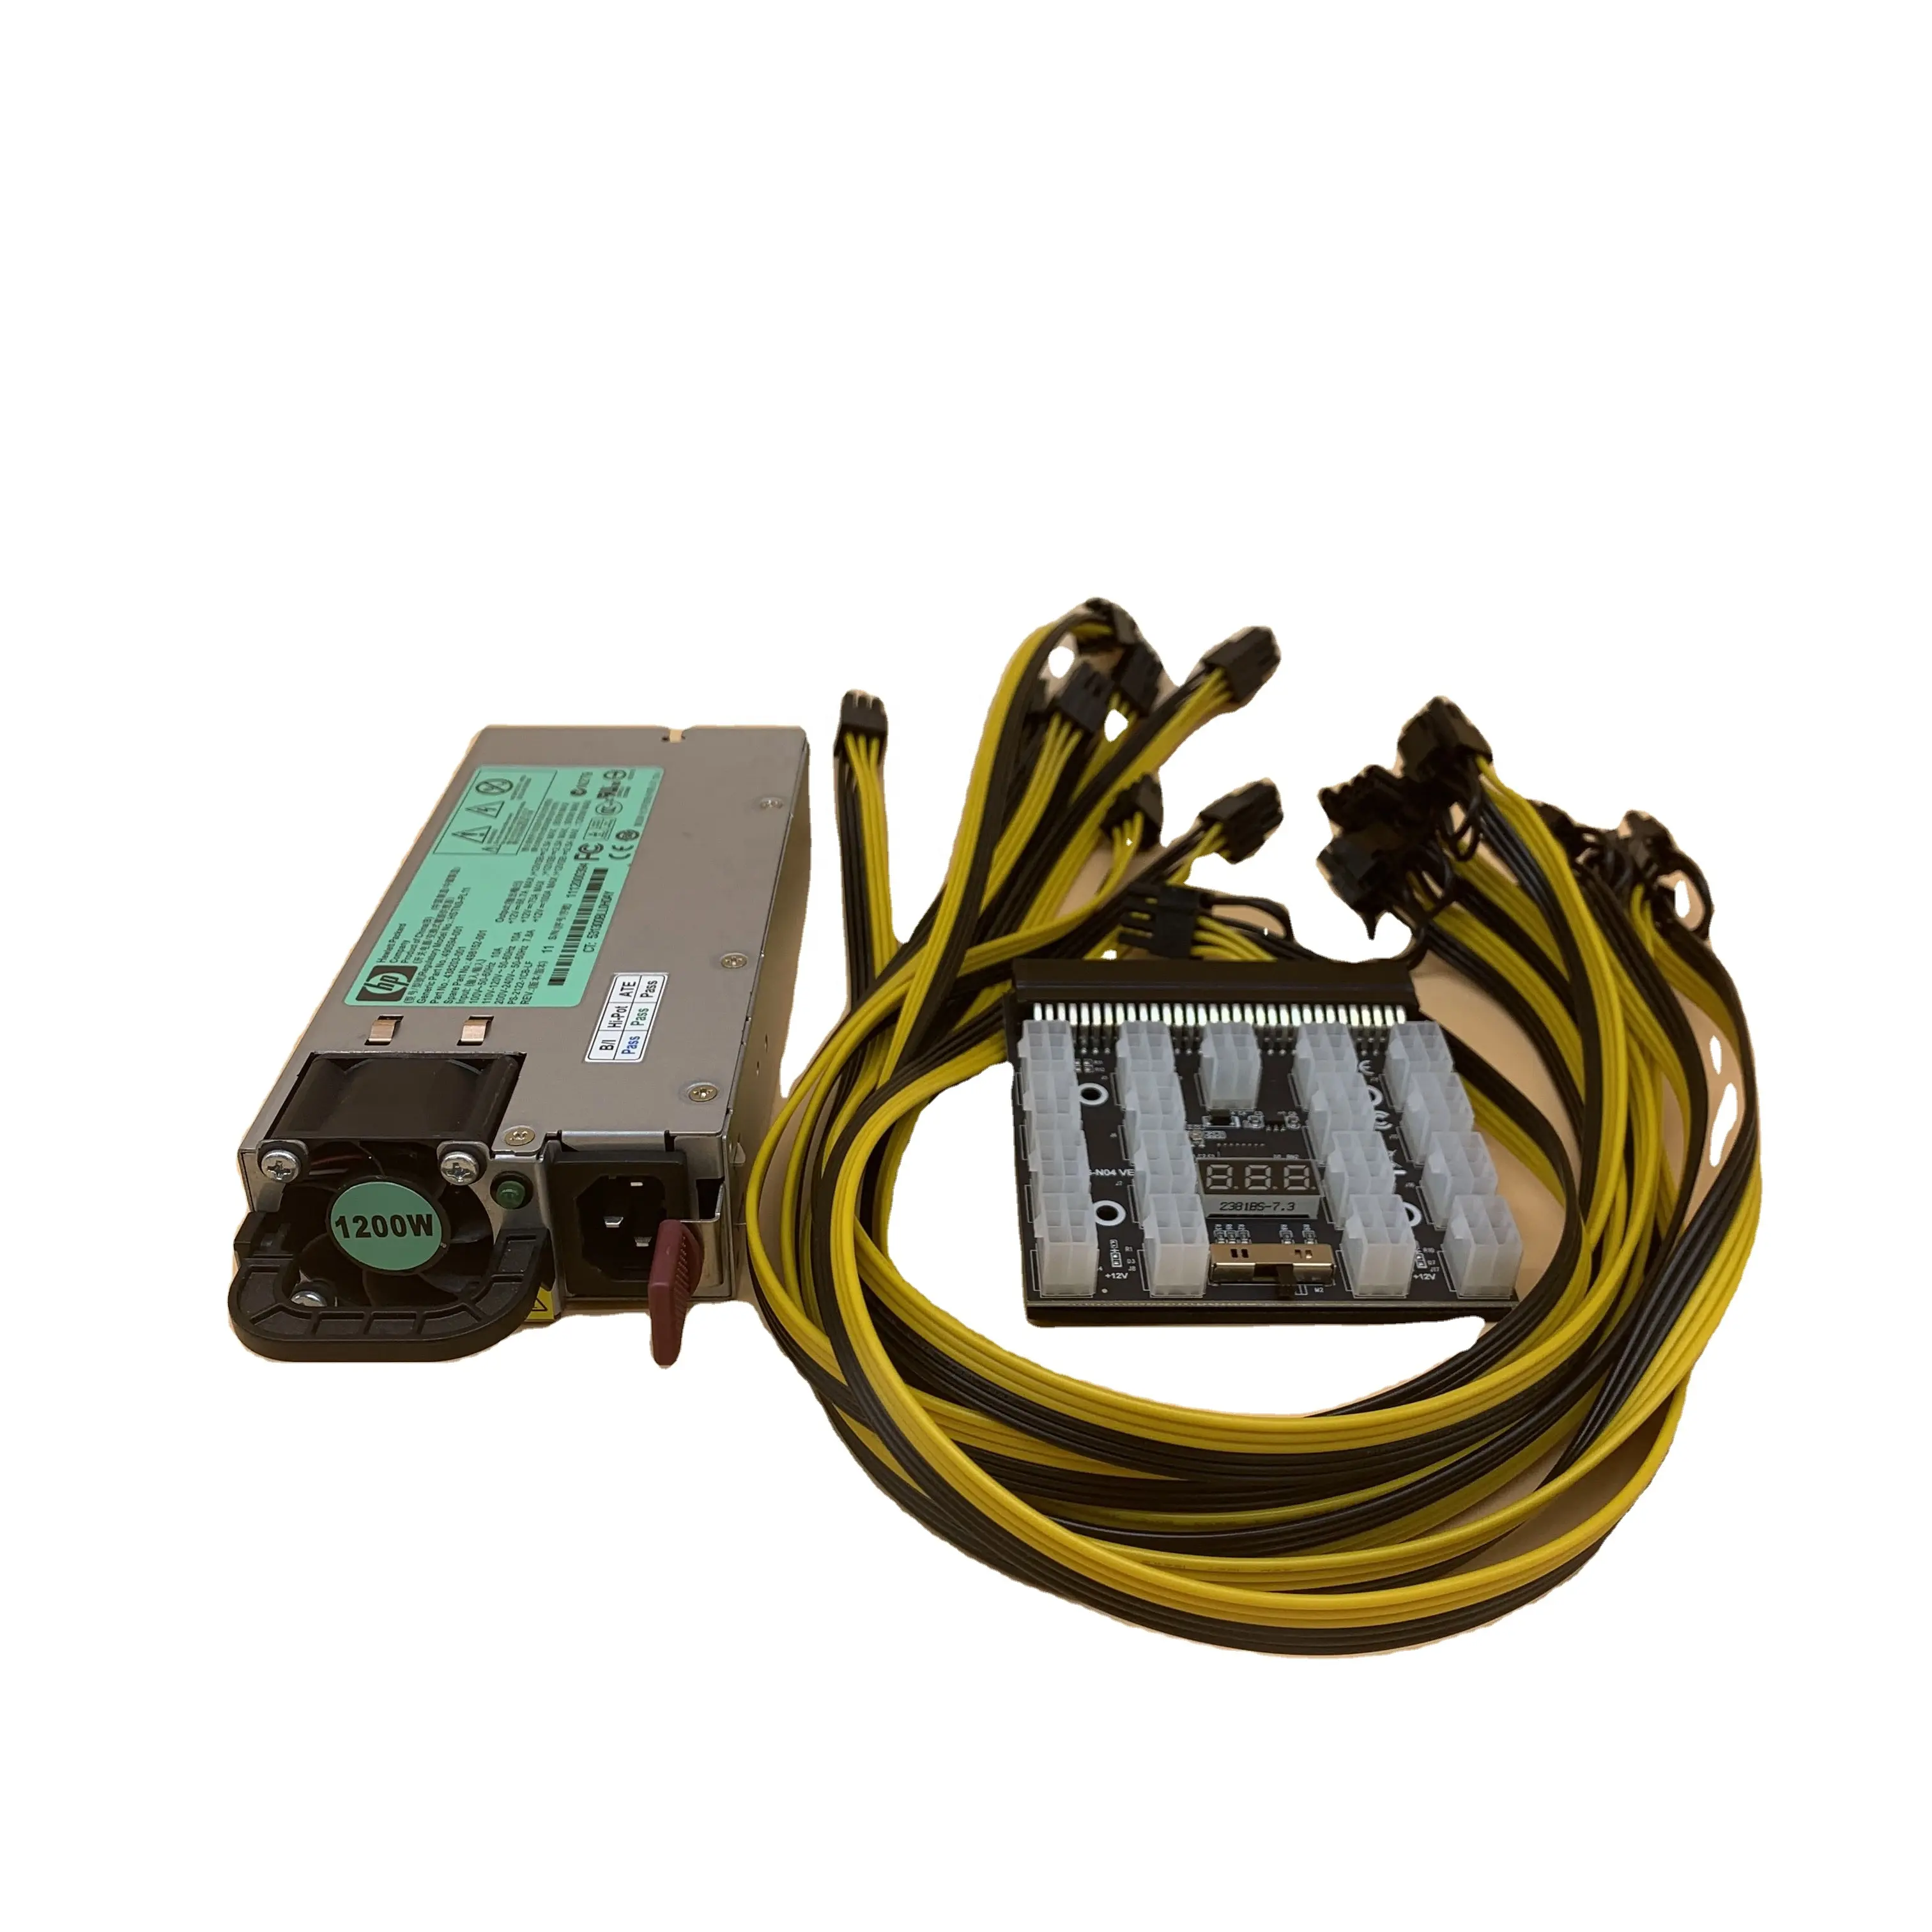 DPS-1200FB A 12v 1200W Mining power supply with 8pcs 6PIN to 6+2PIN cables and 12/17ports breakout board